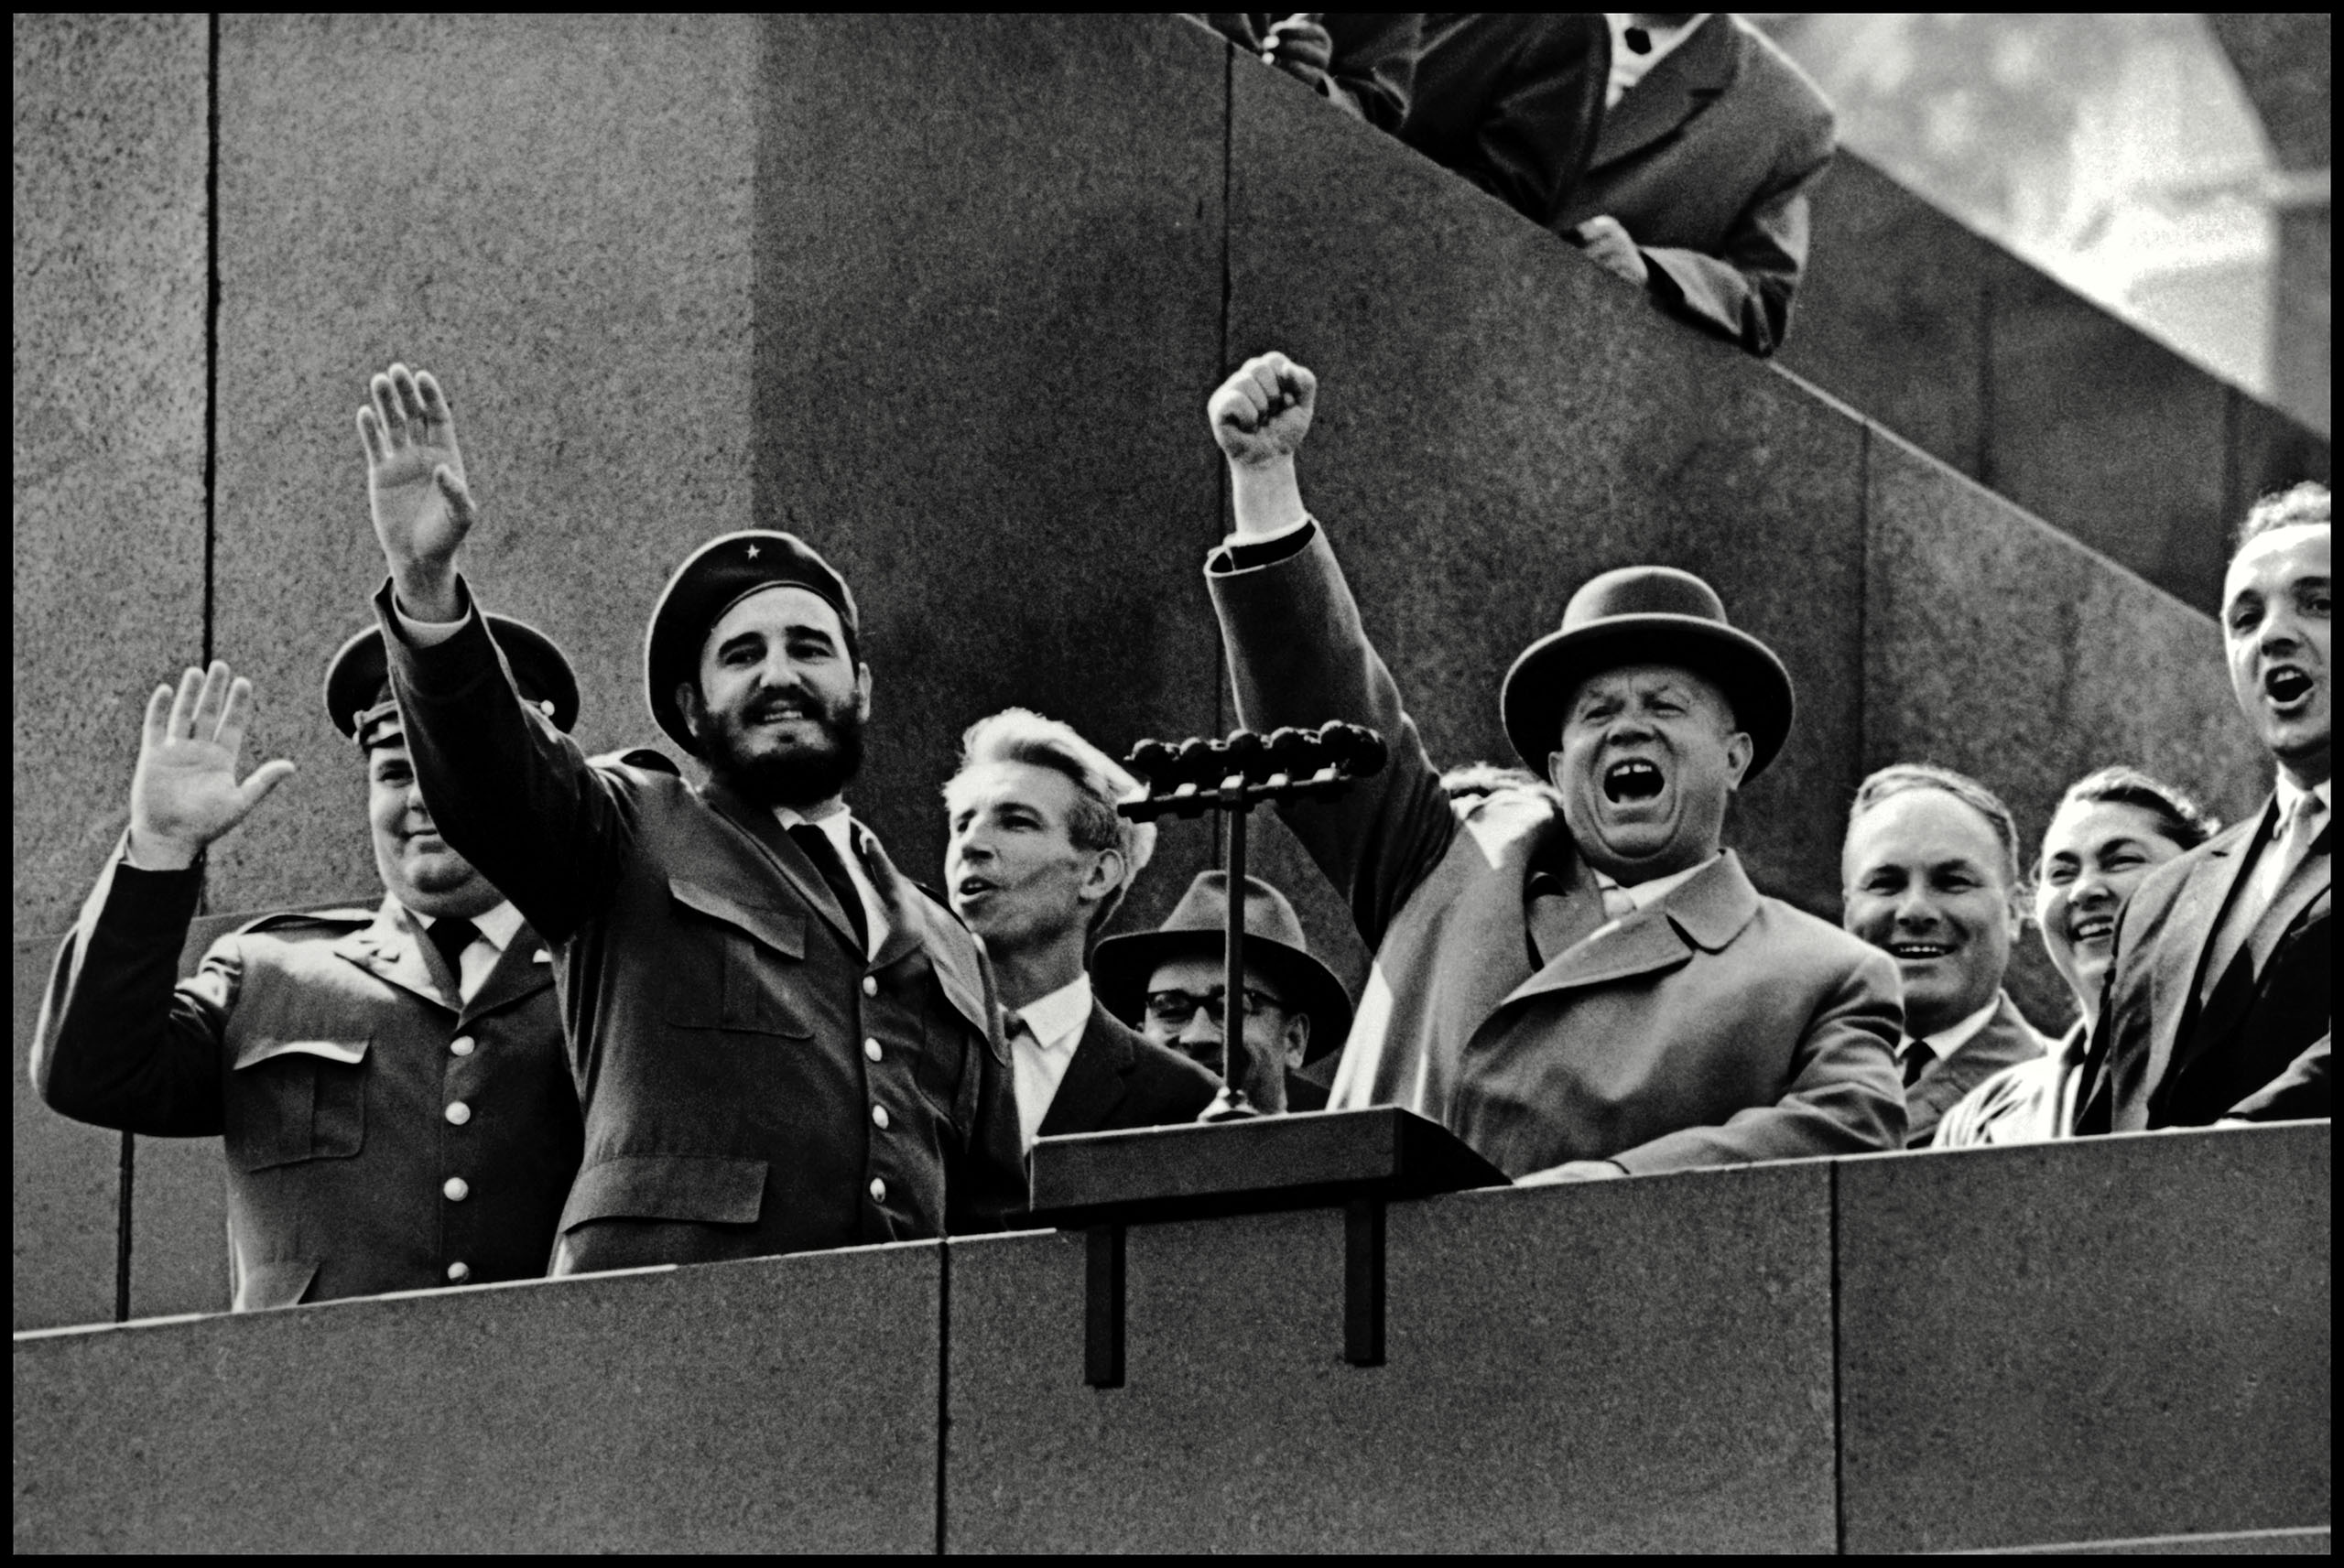 At the height of the Soviet-Cuban cooperation, Nikita Khrushchev welcomes Cuban President Fidel Castro at the podium of the Kremlin in front of the Red Square in Moscow, 1961.